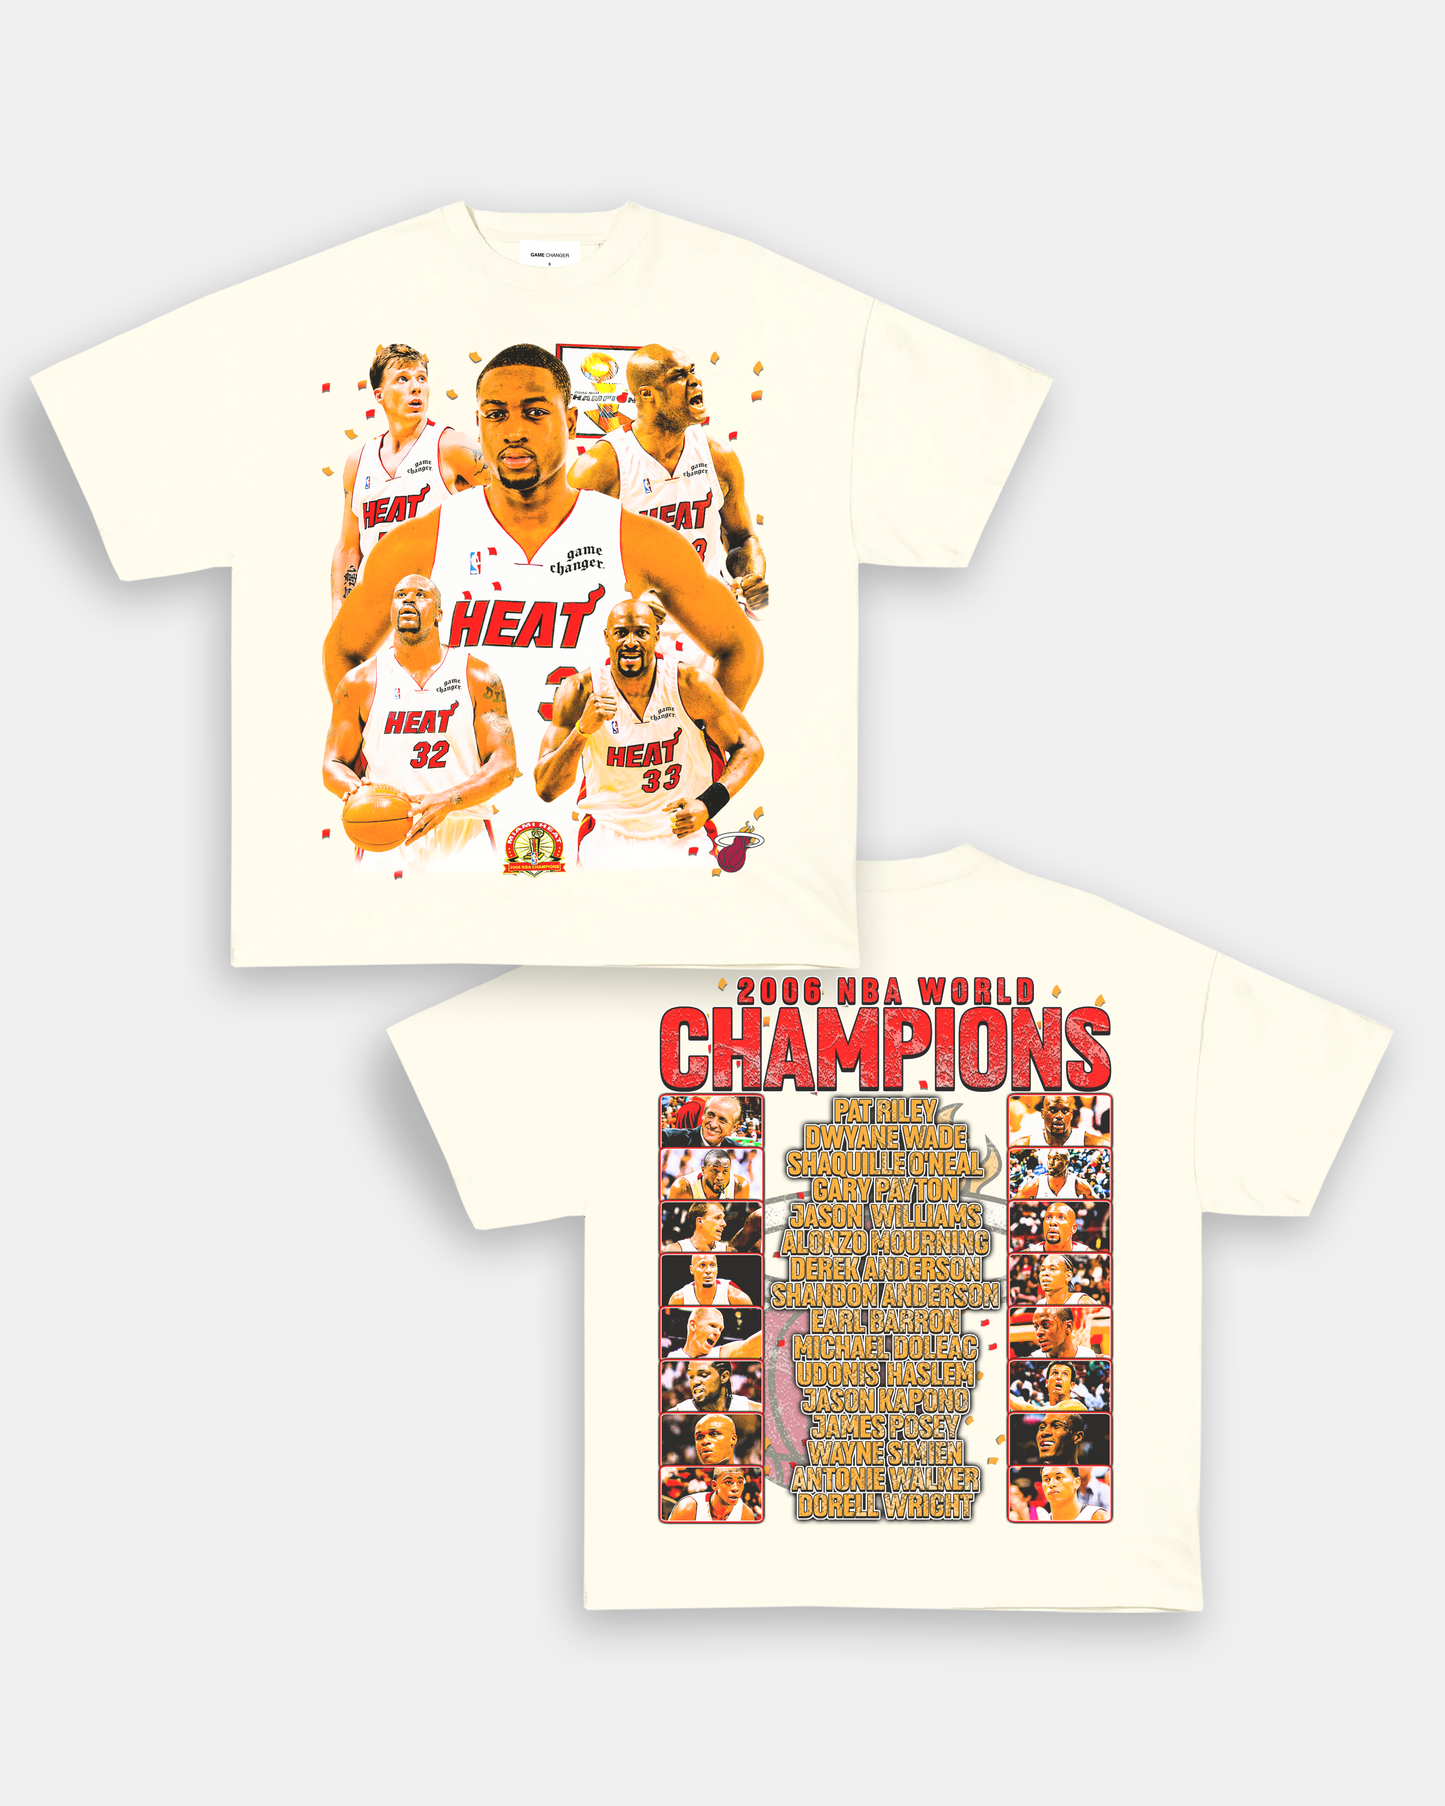 2006 NBA CHAMPS TEE - [DS]